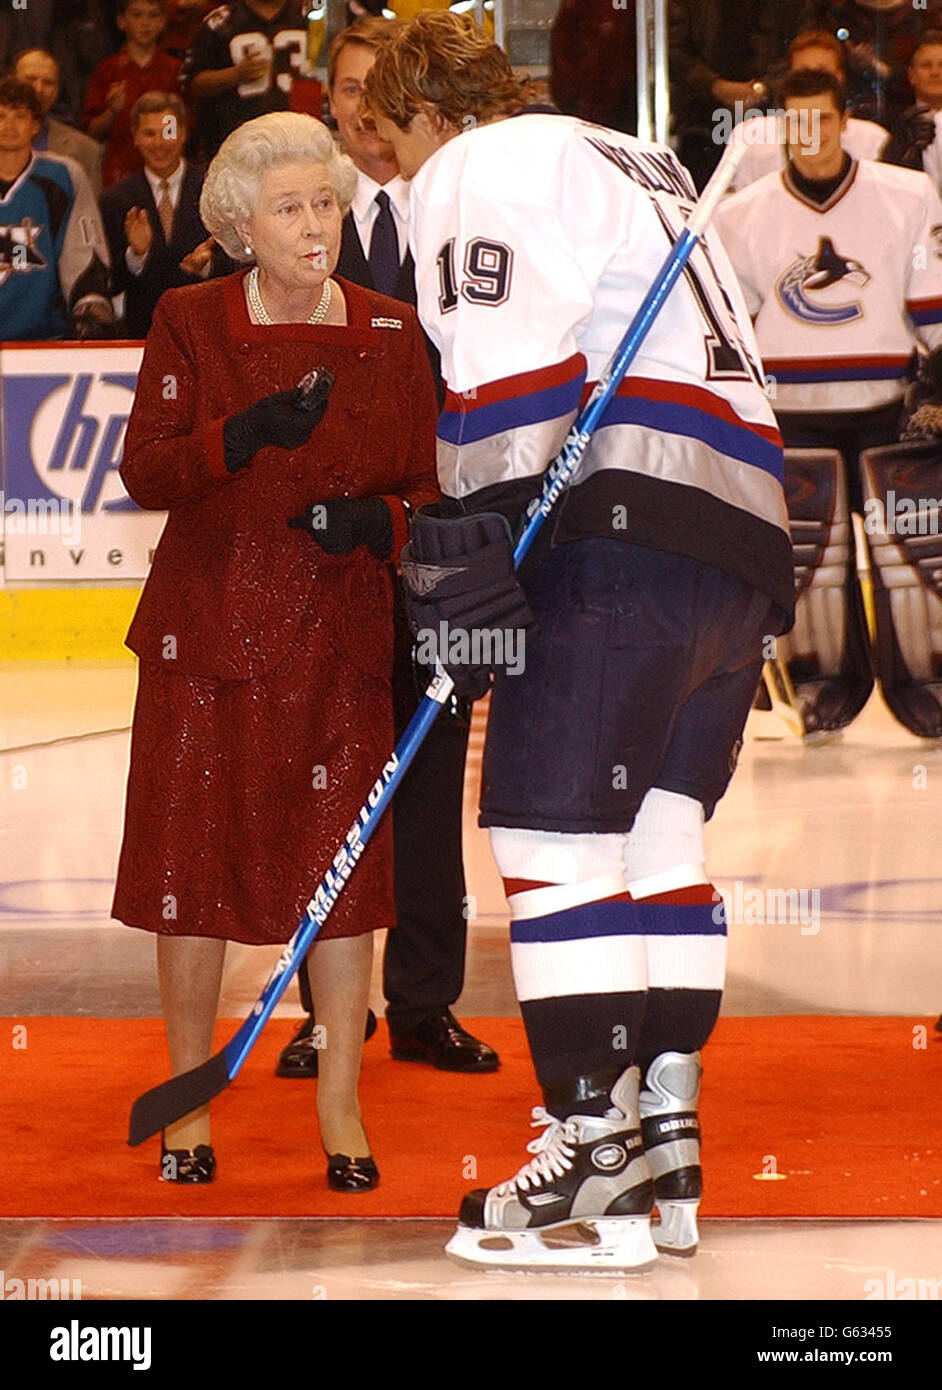 Britain's Queen Elizabeth II holds the puck as she talks to Marcus Naslund of the Vancouver Canucks before she started an ice hockey game between San Jose Sharks and Vancouver Canucks in Vancouver, Canada, during her two week Golden Jubilee tour of the country. *..Earlier, The Queen, and her husband, the Duke of Edinburgh, went to church at Christ Church Cathedral in Victoria followed by lunch at the Fairmont Empress Hotel where the royal couple were greeted by the Pipes and Drums of the Canadian Scottish Regiment. Stock Photo